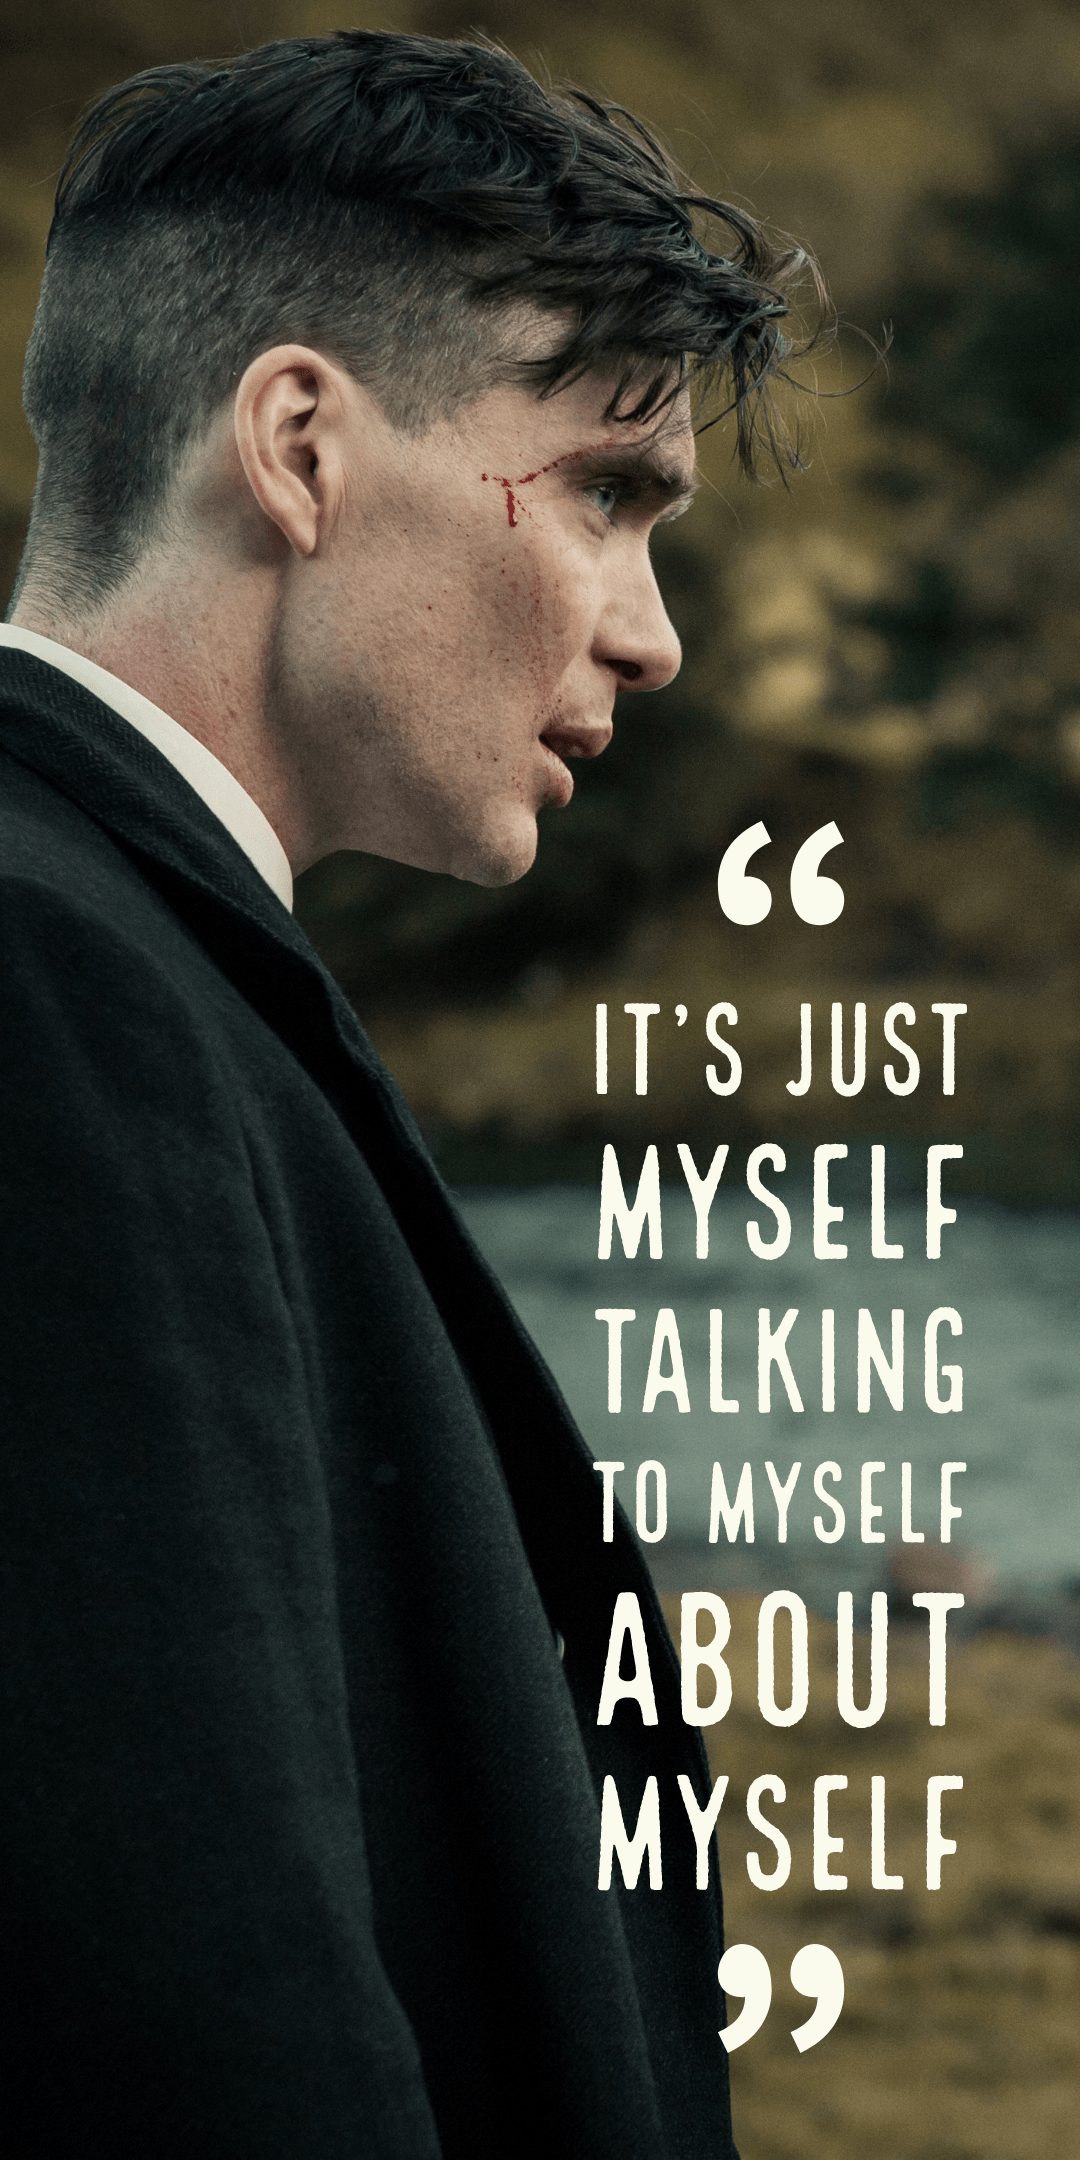 Thomas Shelby Quotes Wallpapers Top Free Thomas Shelby Quotes Backgrounds Wallpaperaccess 